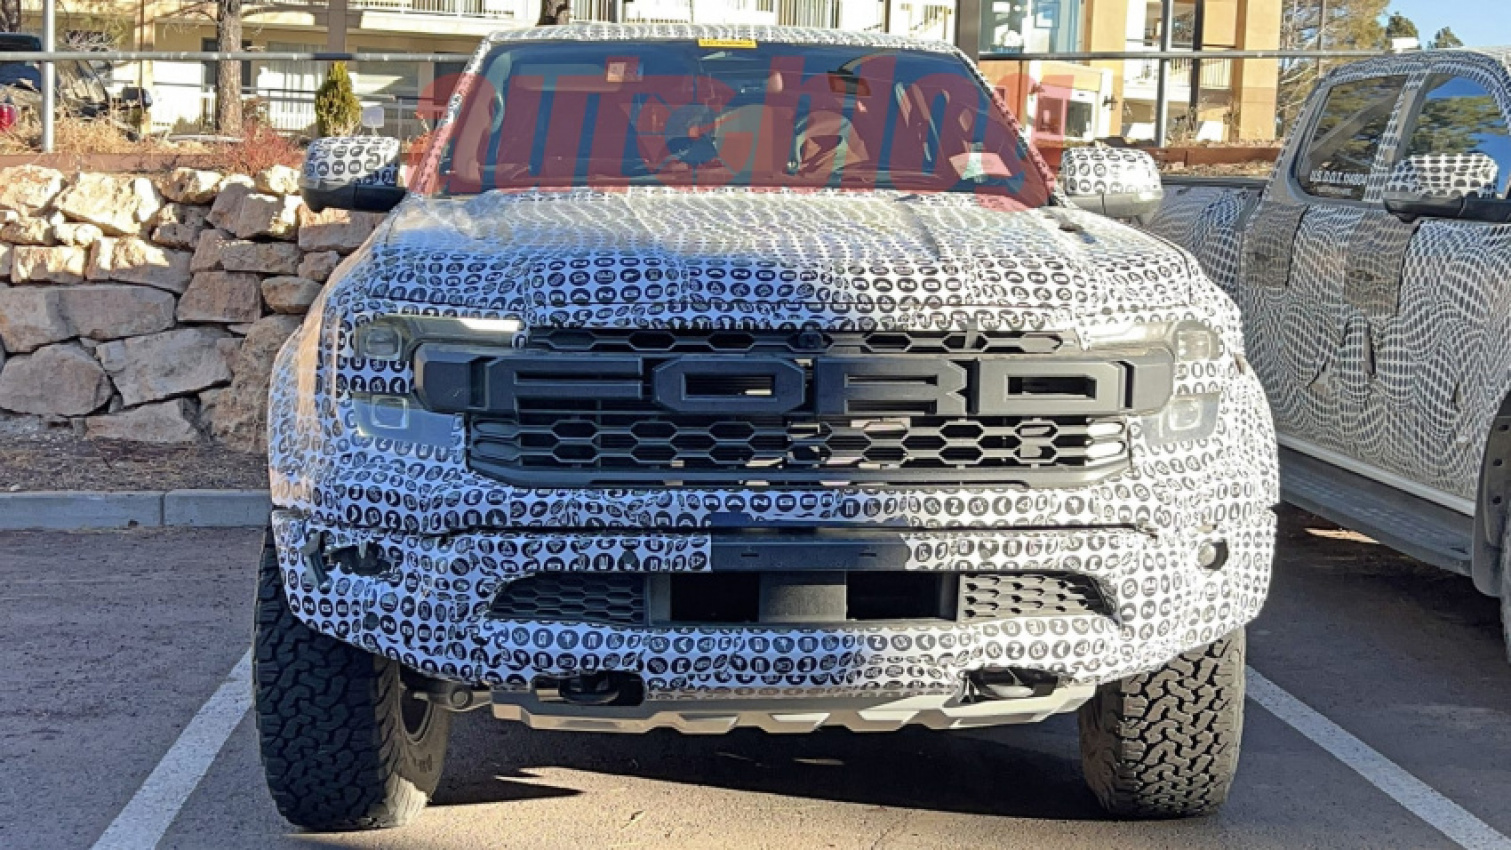 autos, cars, ford, spy photos, ford ranger, ford ranger raptor, off-road vehicles, performance, spy-photos, truck, ford ranger raptor interior spy photos show raptor-specific changes